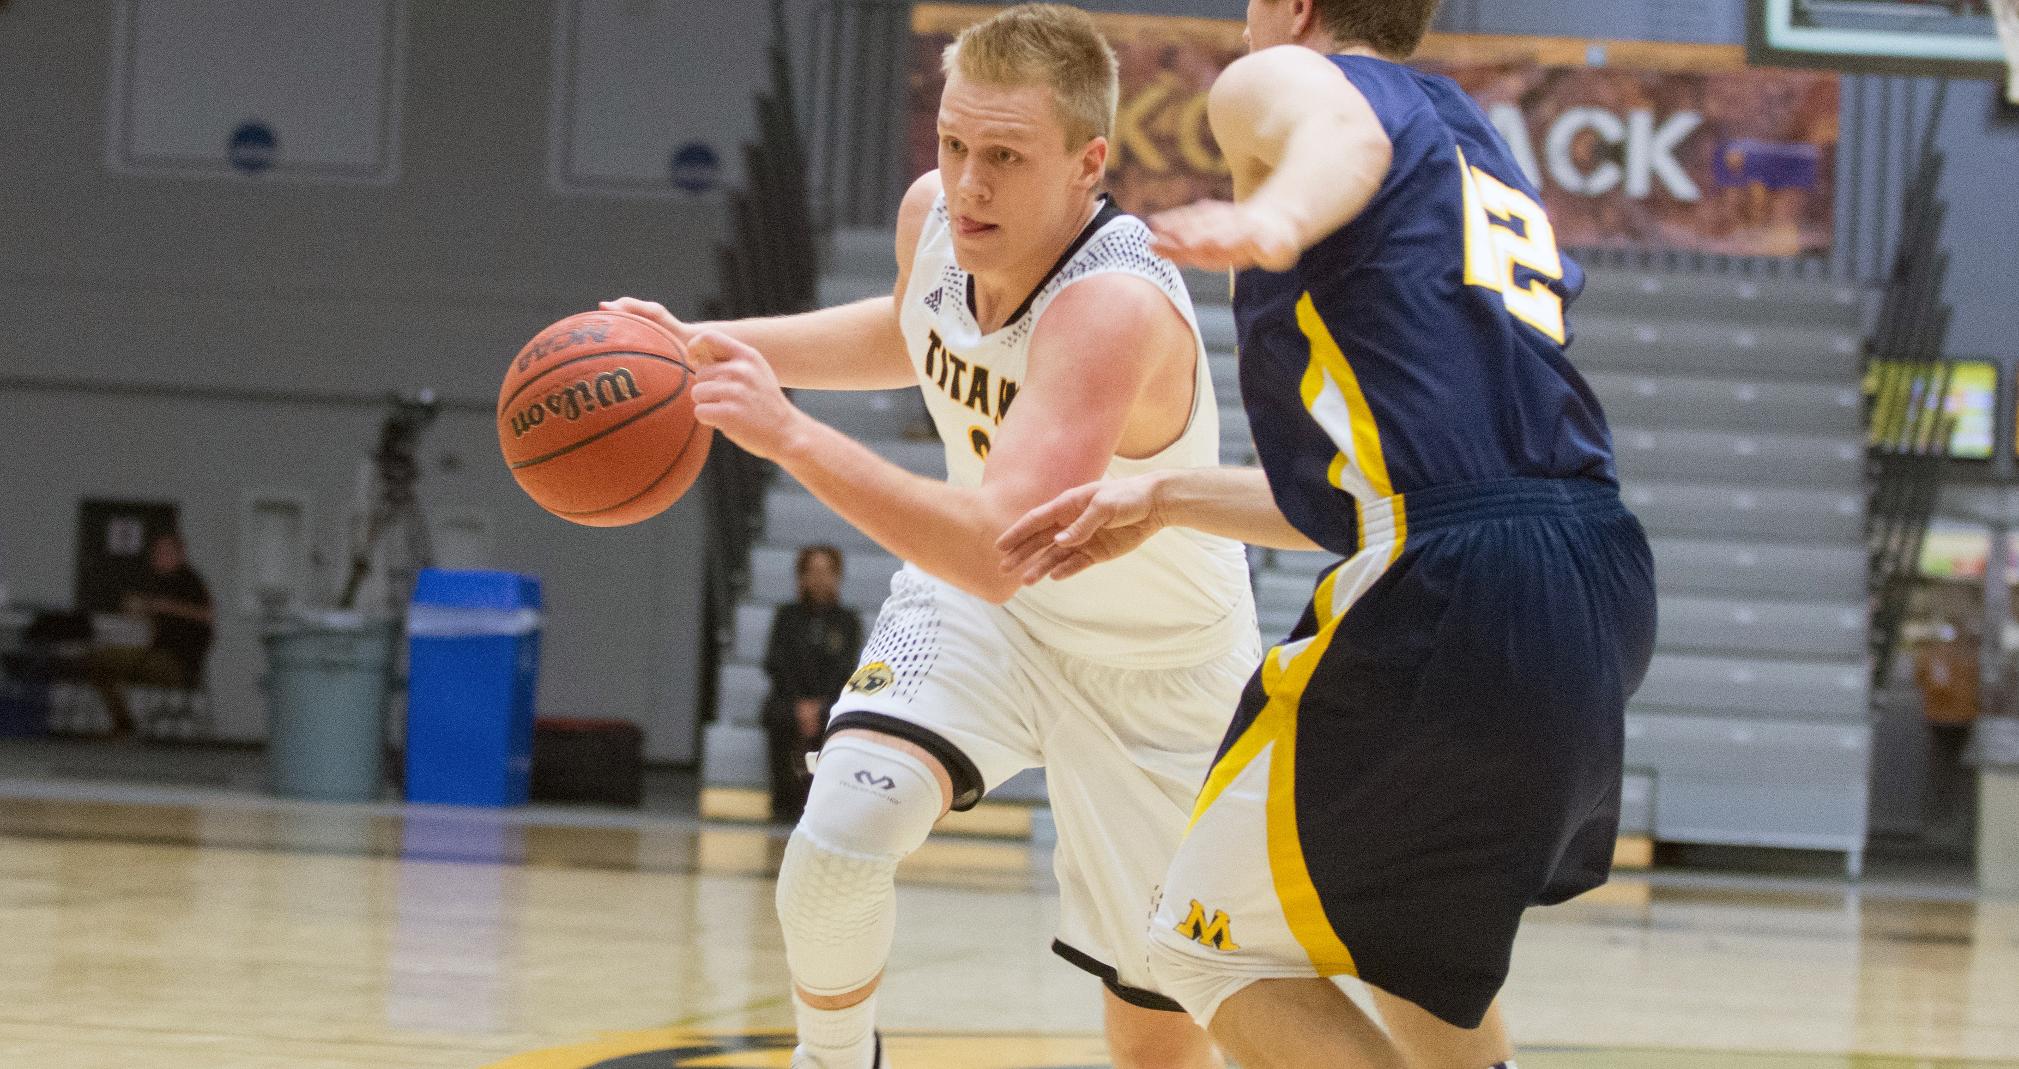 Ben Boots scored a career-best 27 points against the Pioneers, including 20 in the second half with the help of 11 free throws.